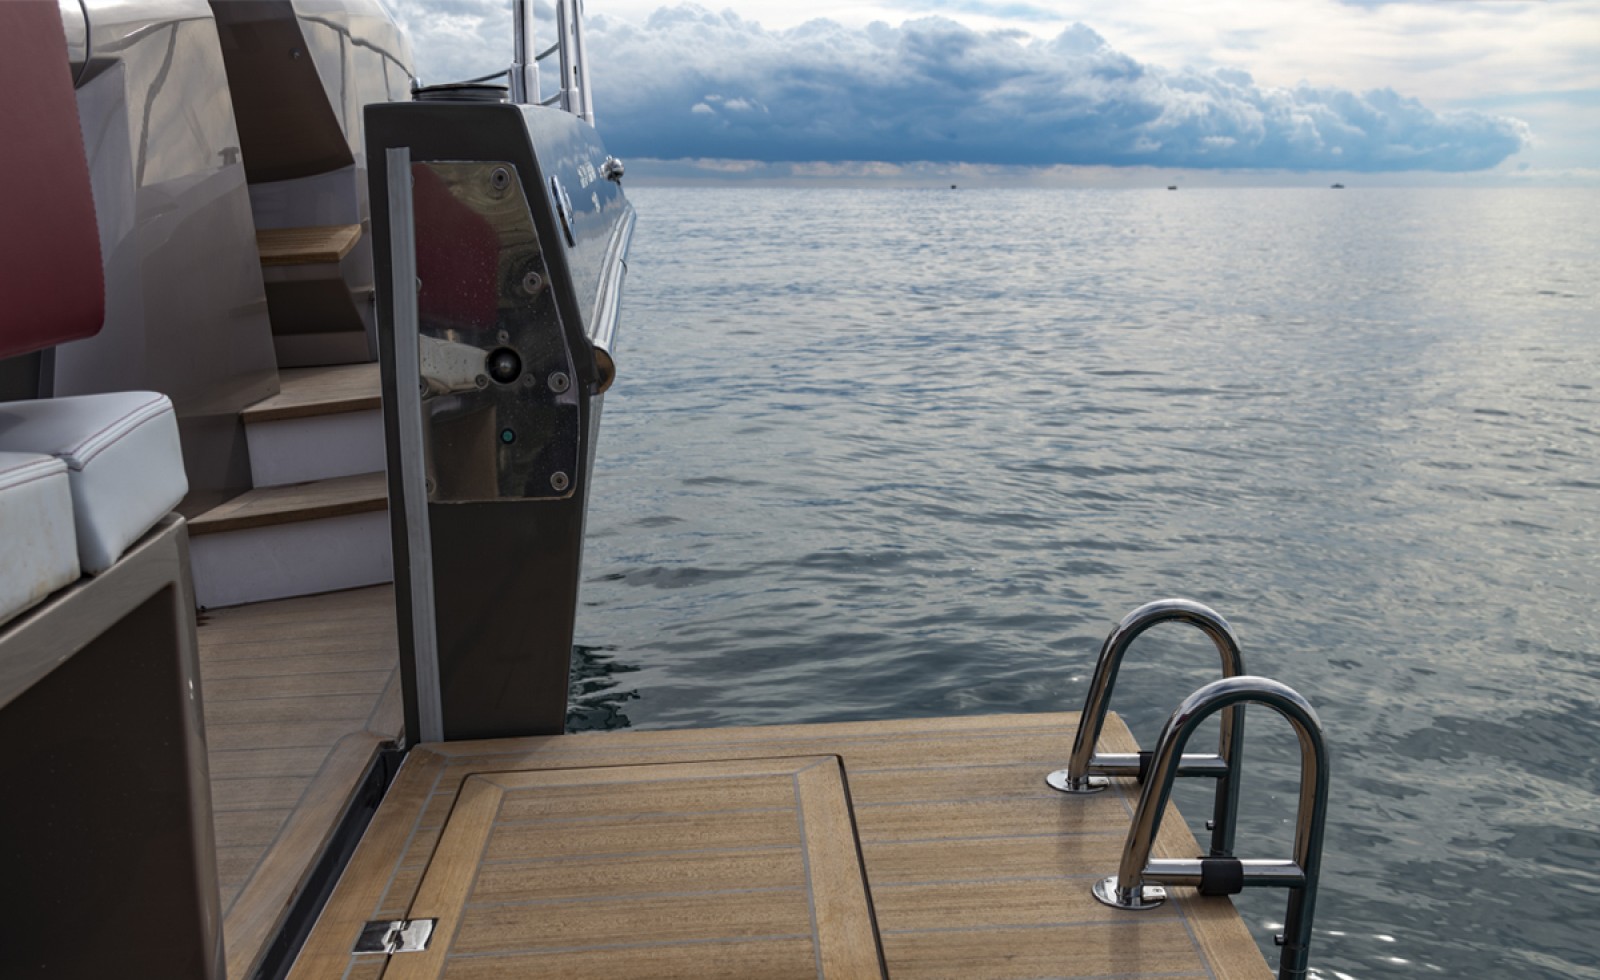 BOATING FOR BEGINNERS: FINDING THE PERFECT BOAT.